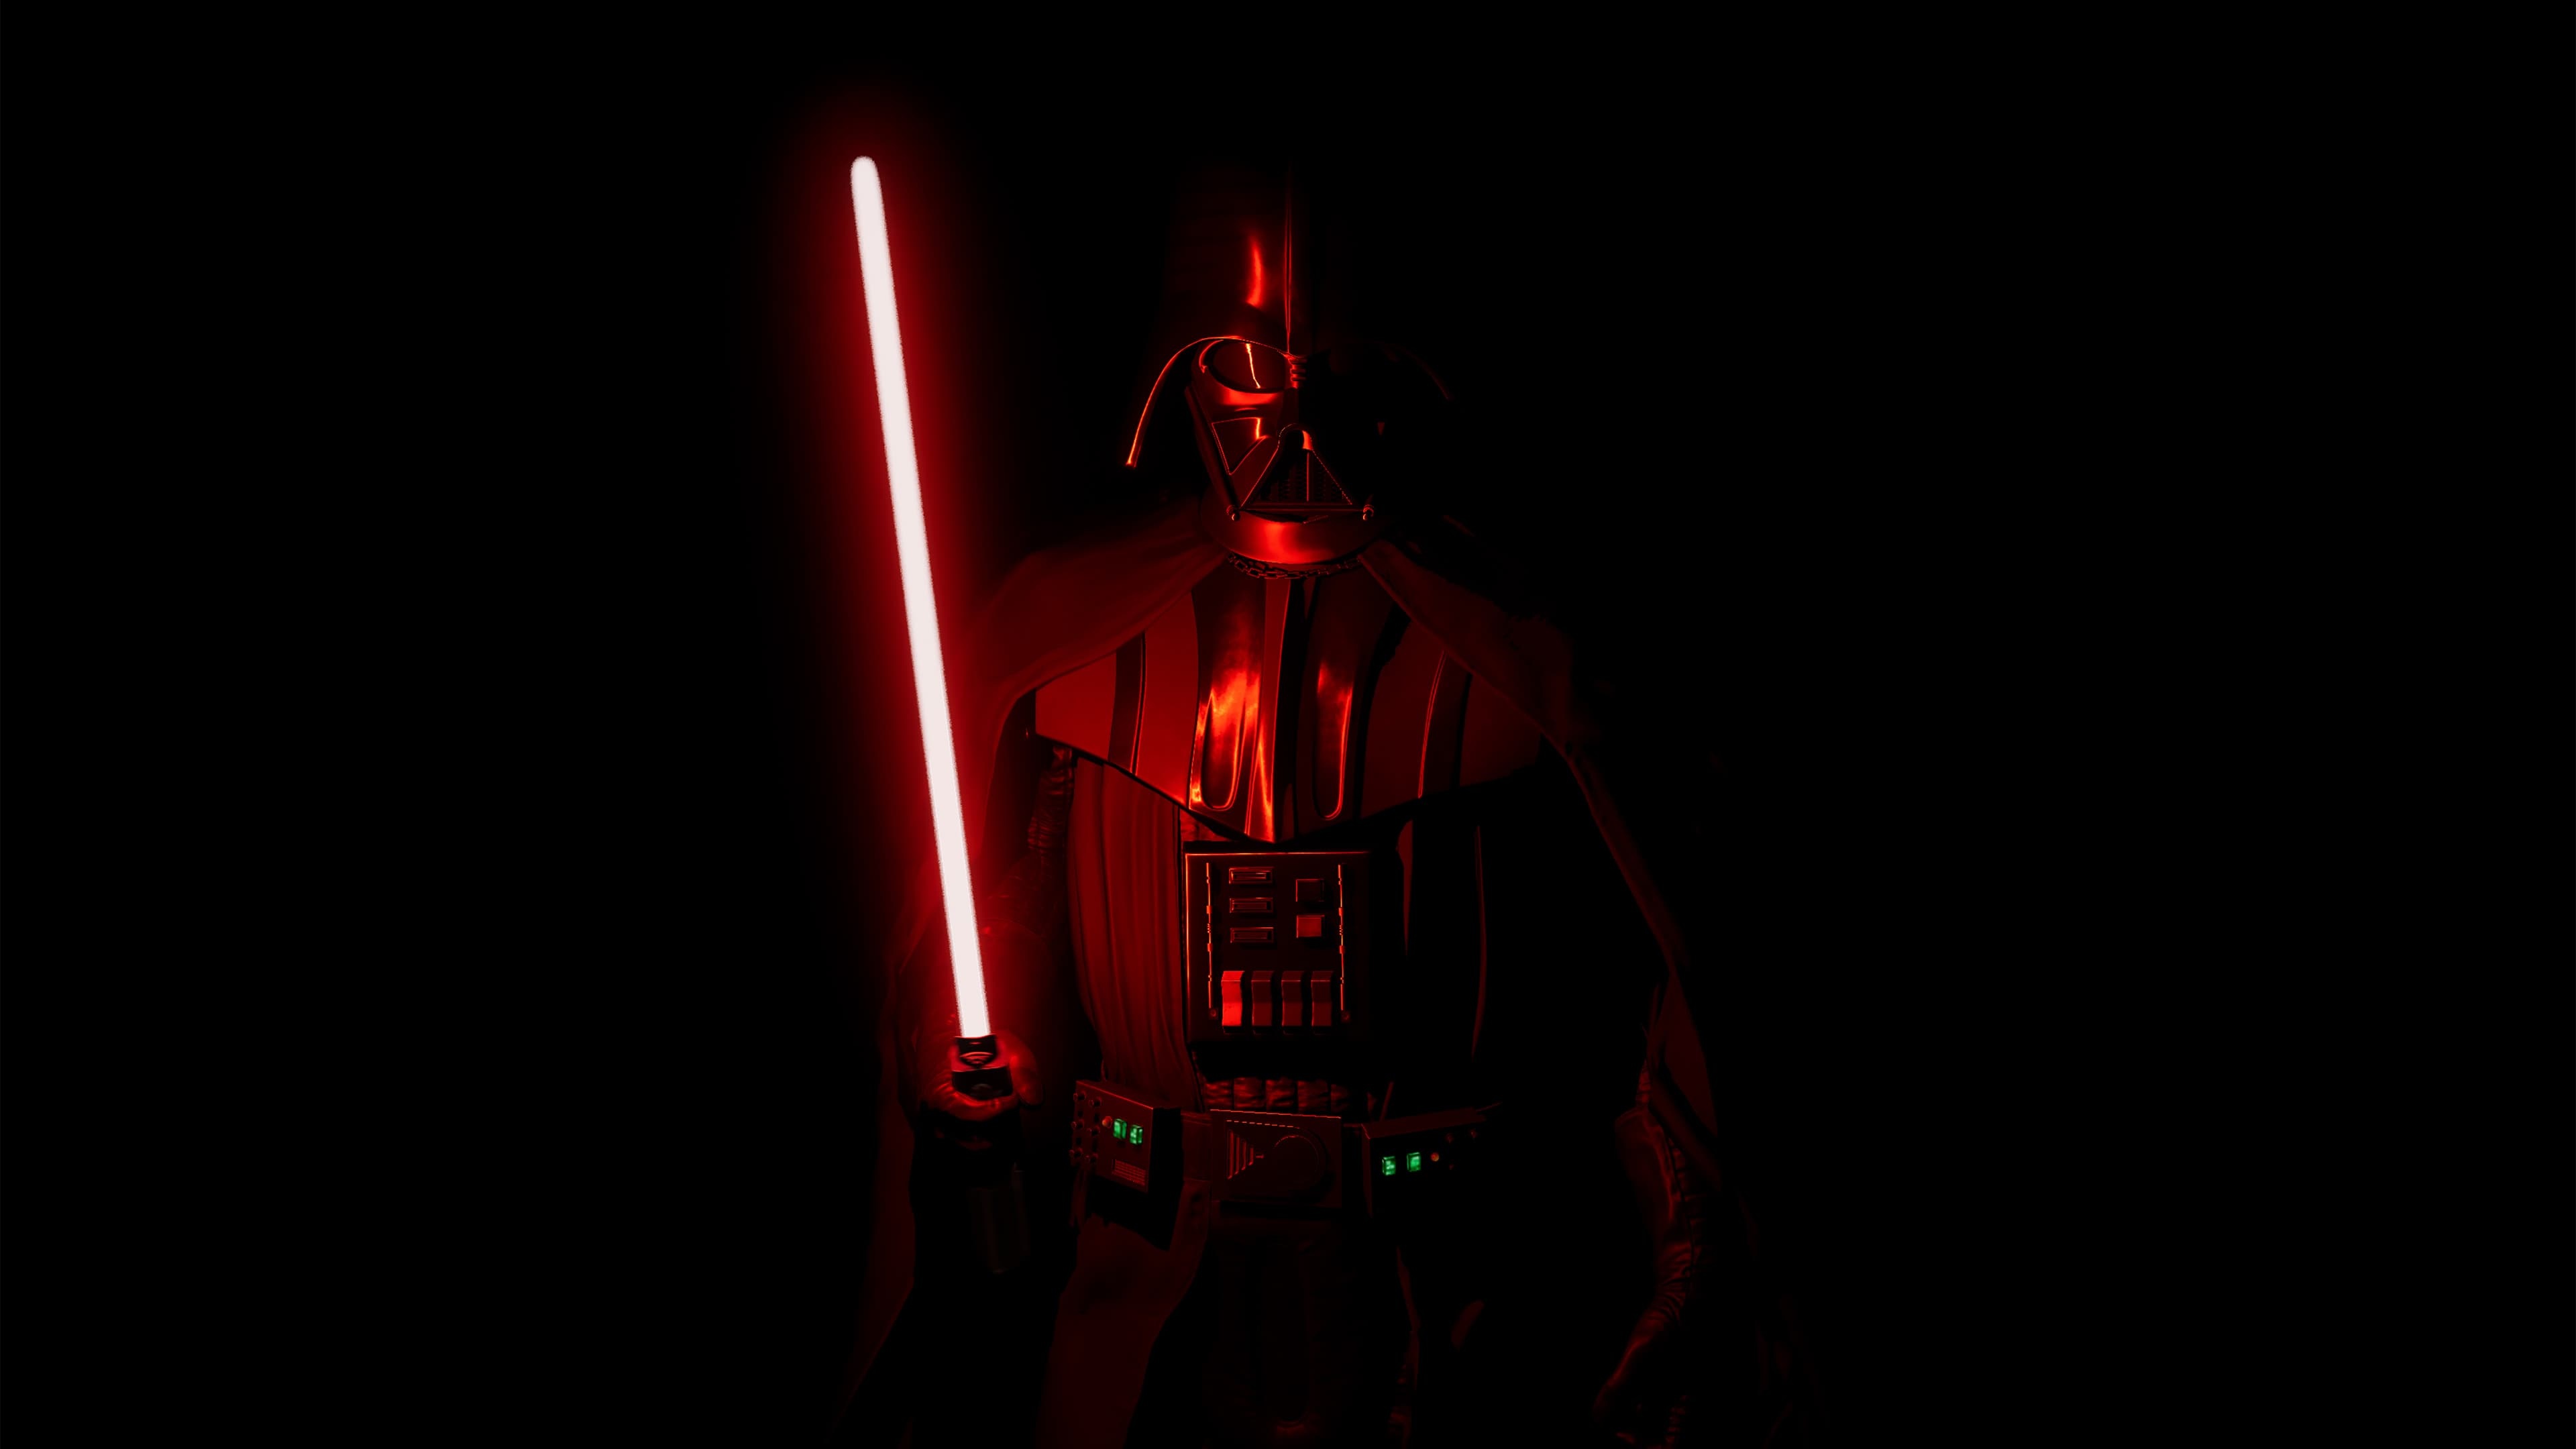 Sith: Darth Vader, Film character, The lead villain of the popular American science fiction franchise. 3840x2160 4K Background.